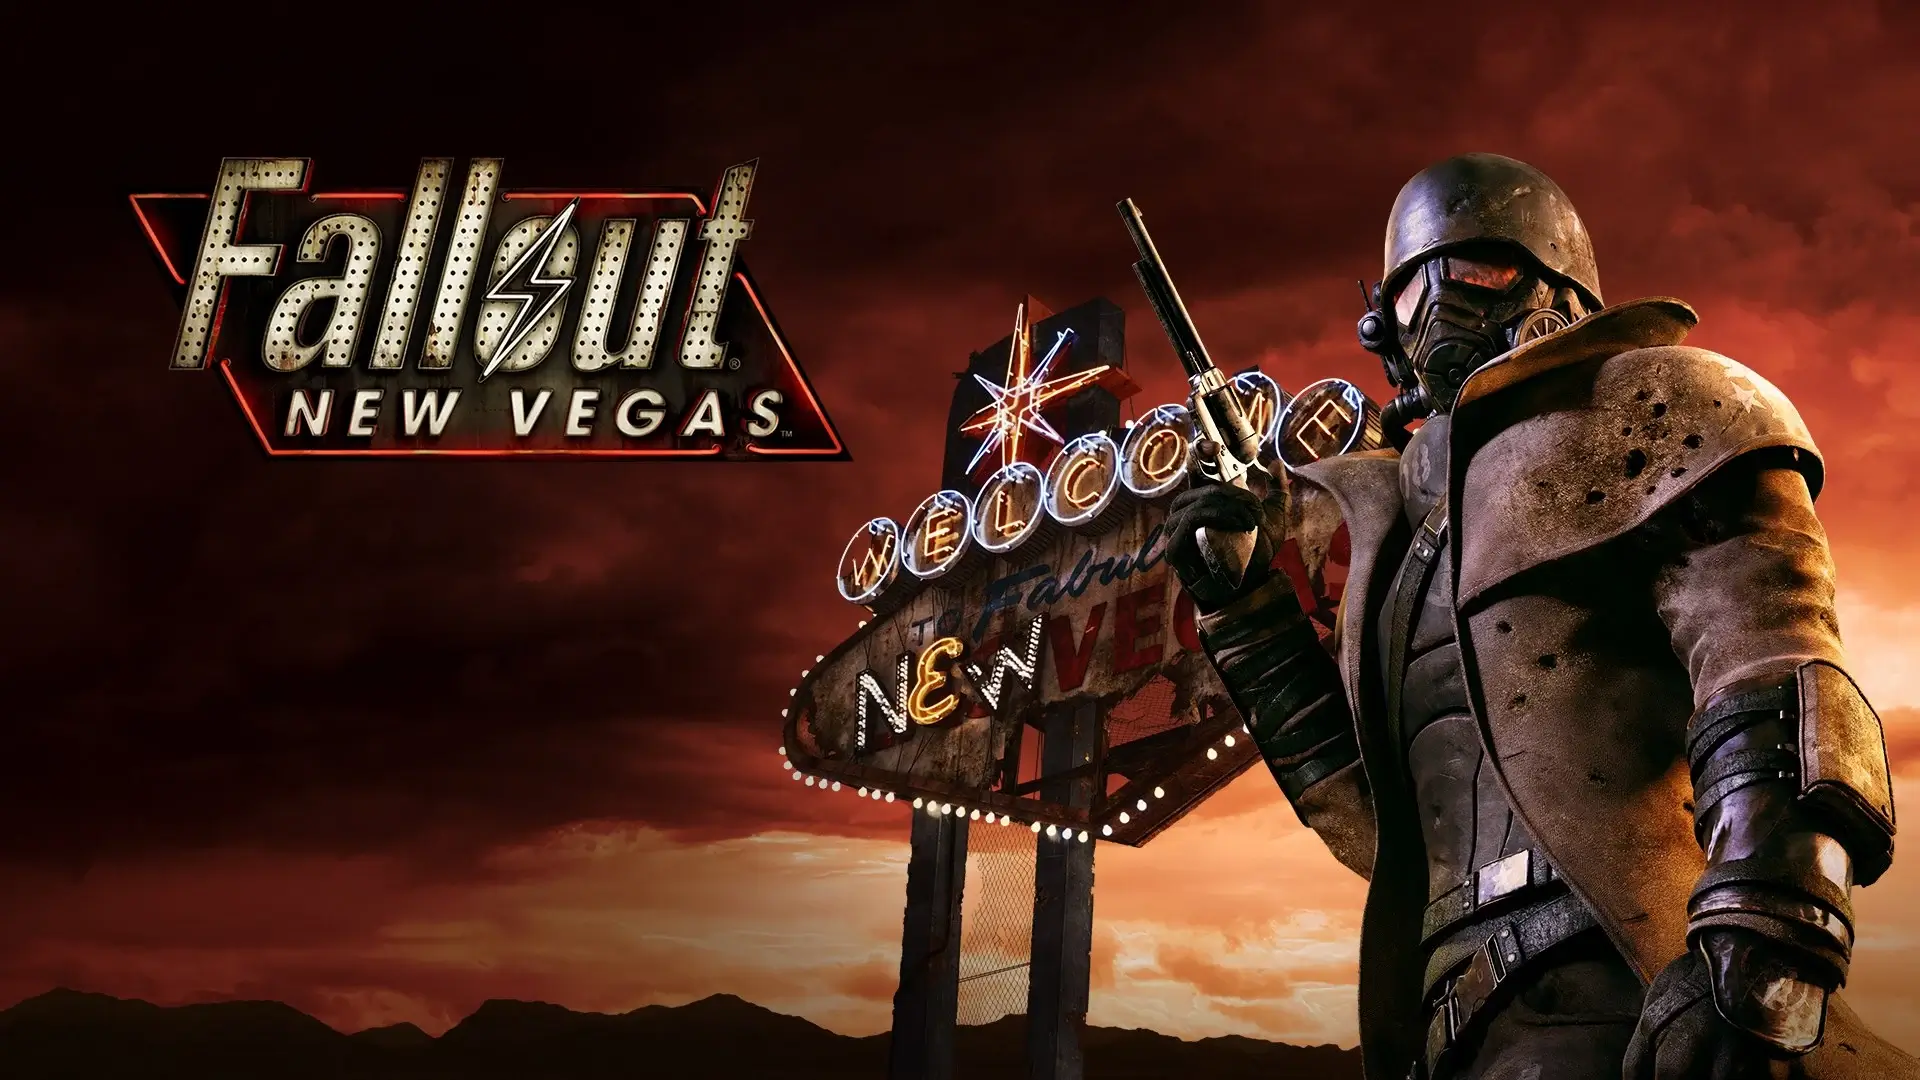 Fallout New Vegas Free Download: Grab the Acclaimed RPG on PC Now!